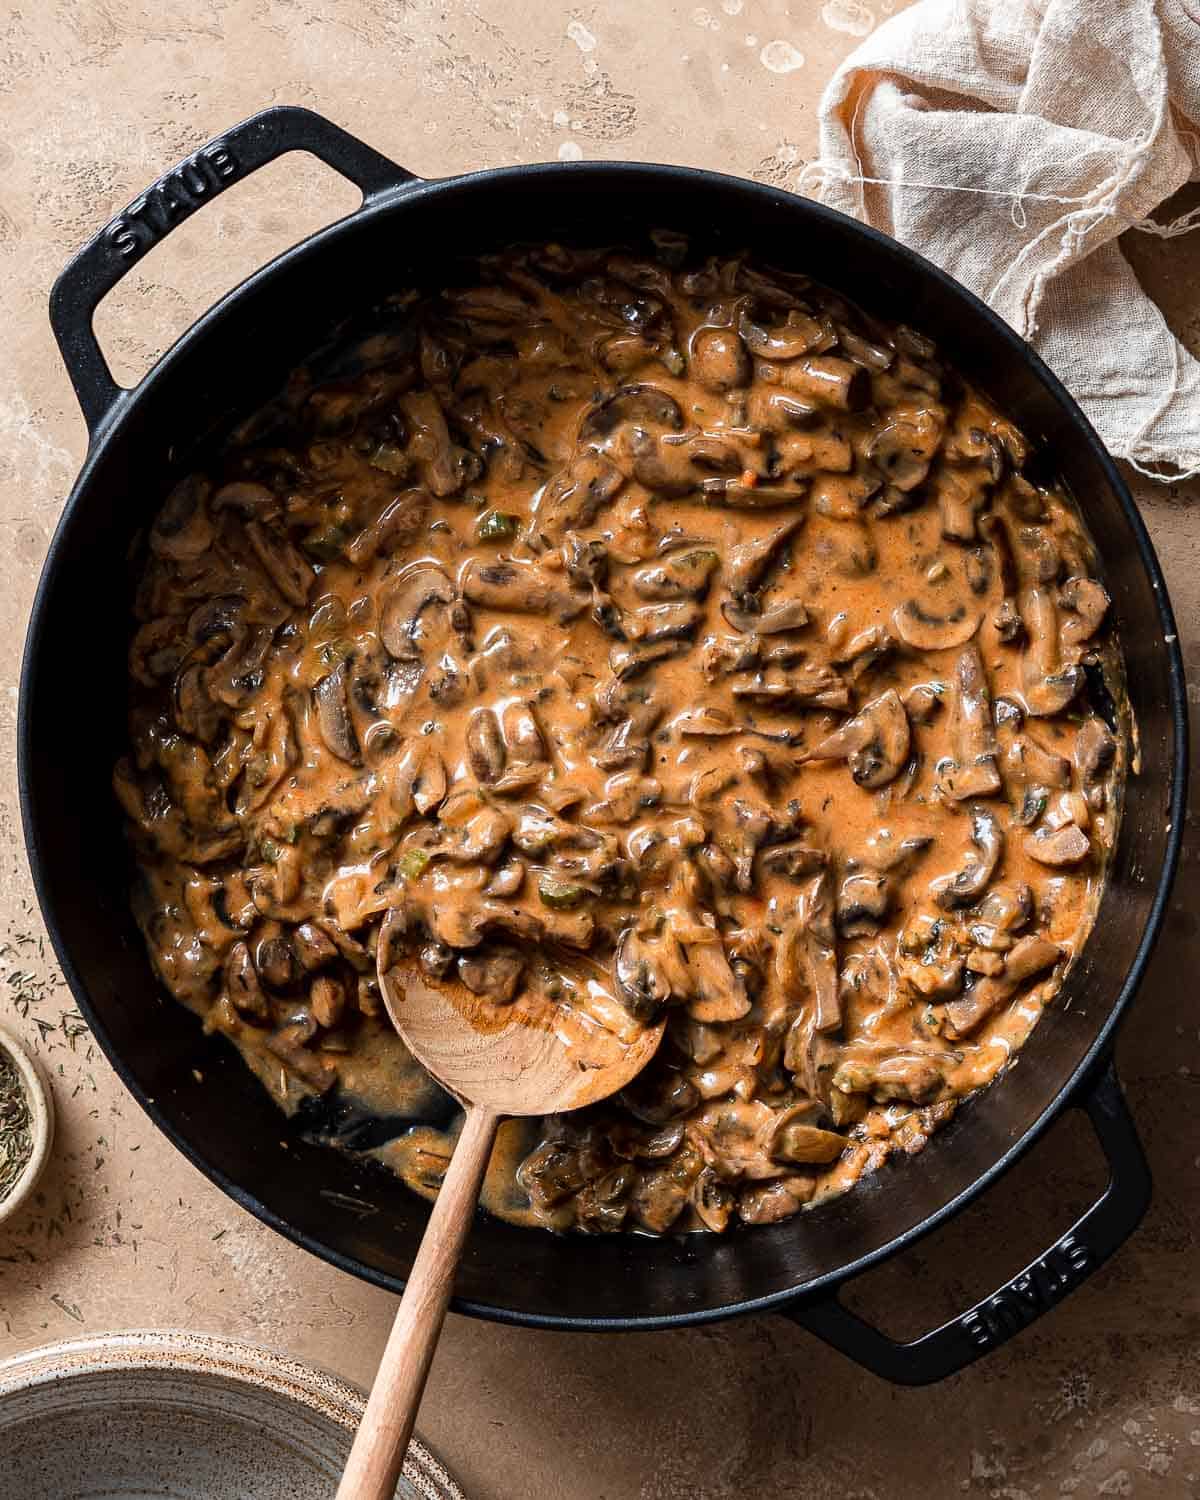 1 cast iron skillet filled with ragout of mushrooms and a wooden spoon.